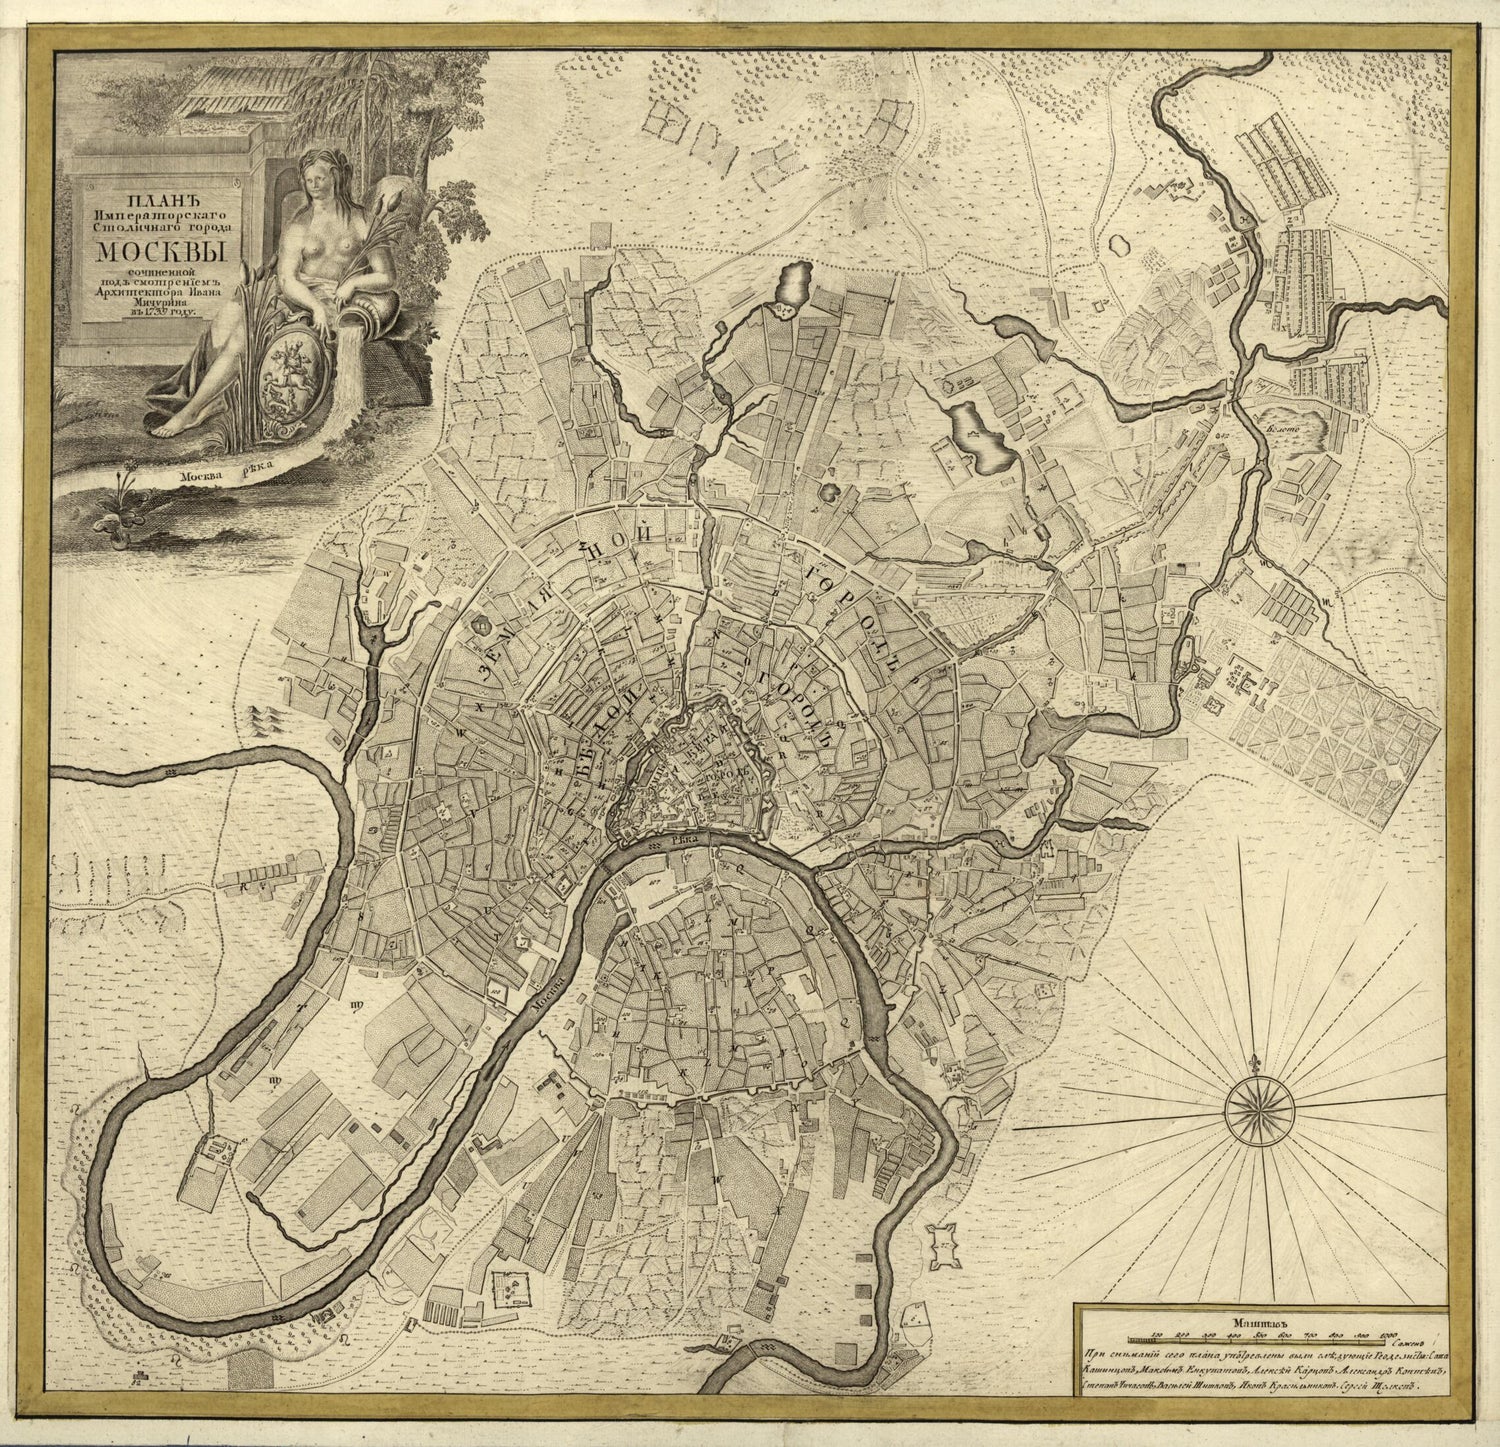 This old map of Plan Imperatorskago Stolichnago Goroda Moskvy from 1745 was created by Ivan Fedorovich Michurin in 1745